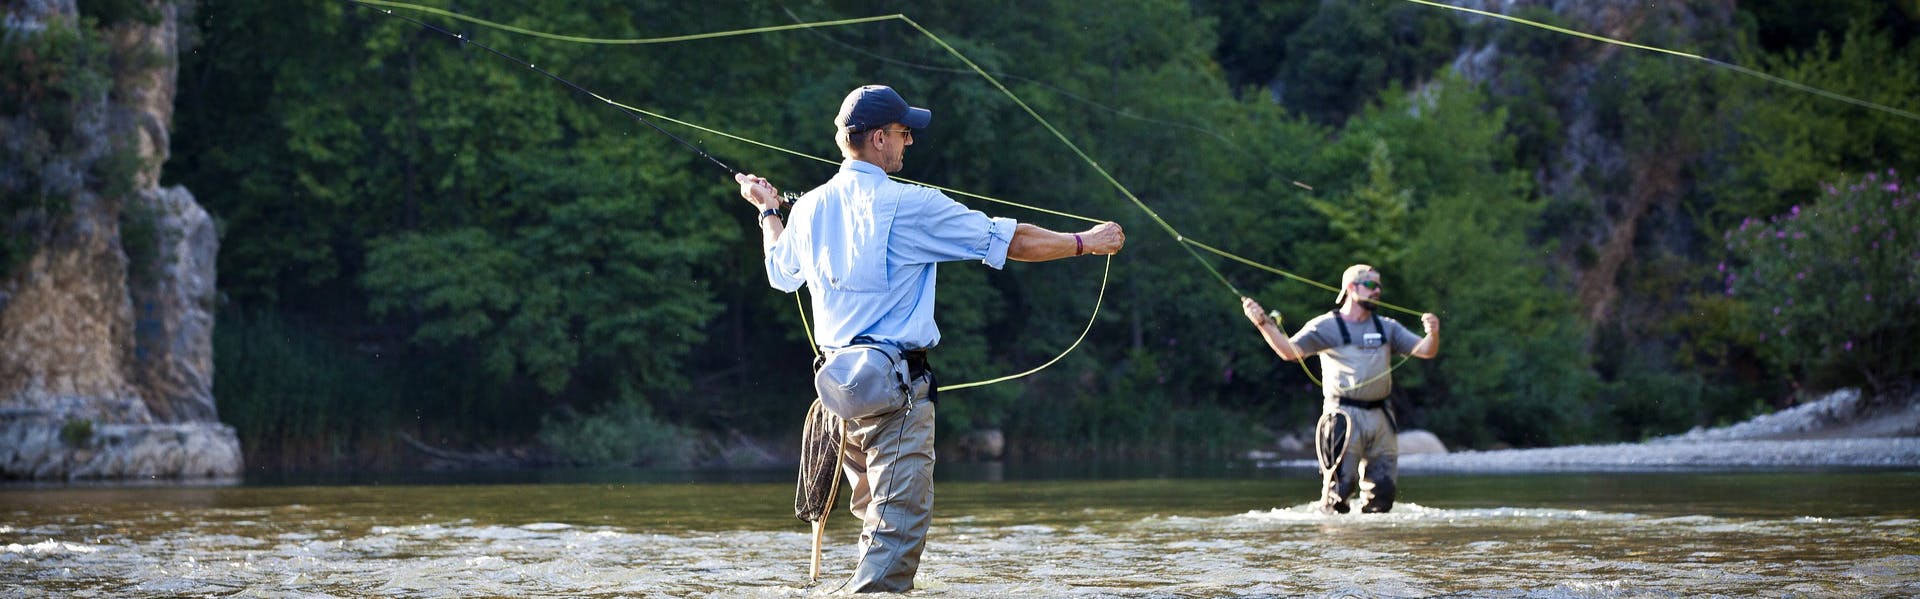 How to Set Up Your Fly Fishing Rod, Reel, and Line